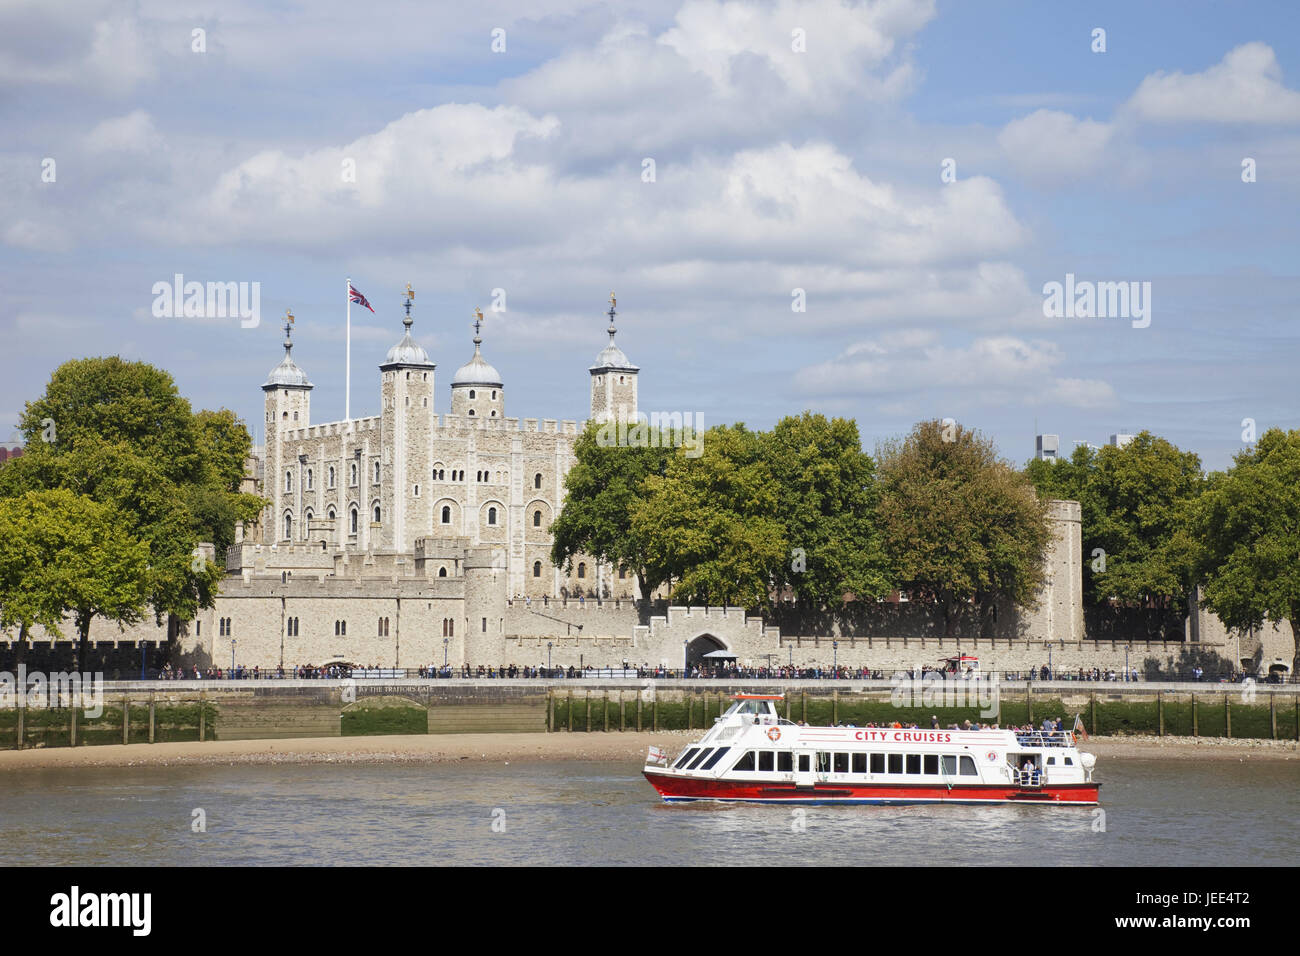 England, London, Tower of London, the Thames, town, architecture, structure, landmark, place of interest, river, ship, ship traffic, tourism, tourist, castle, UNESCO, world cultural heritage, Stock Photo